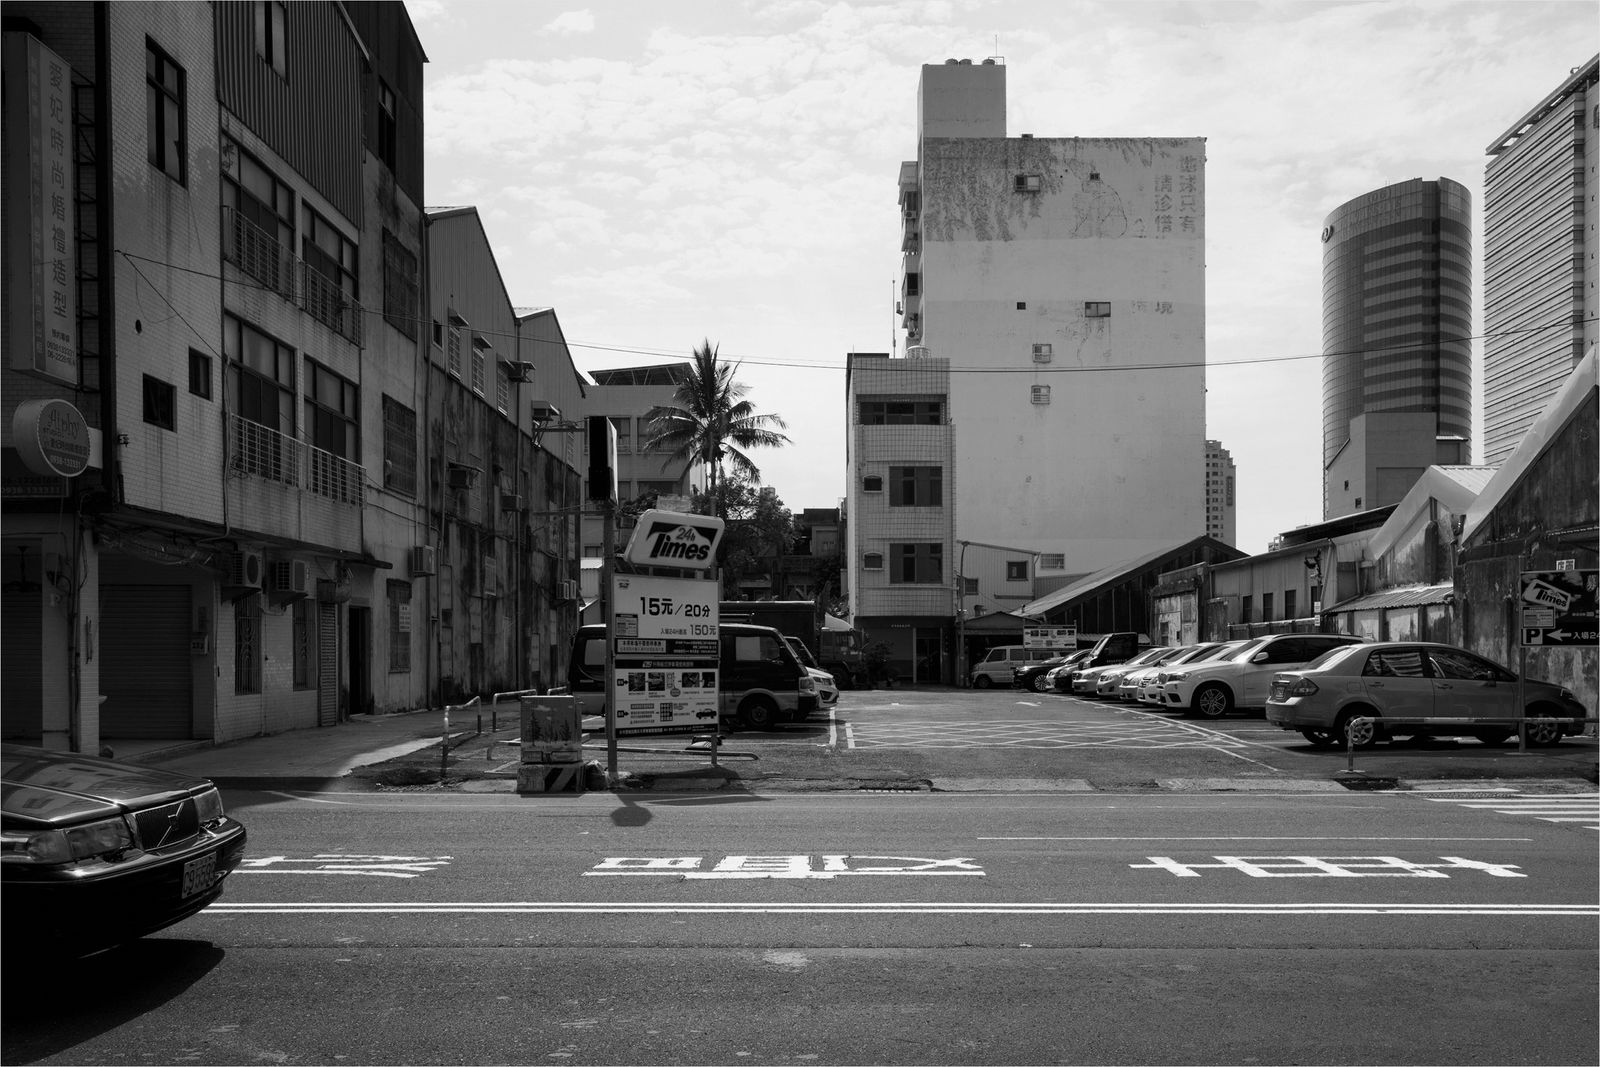 © Yun-Hsiang LIAO - Image from the Daytime and Nearest neighbor photography project